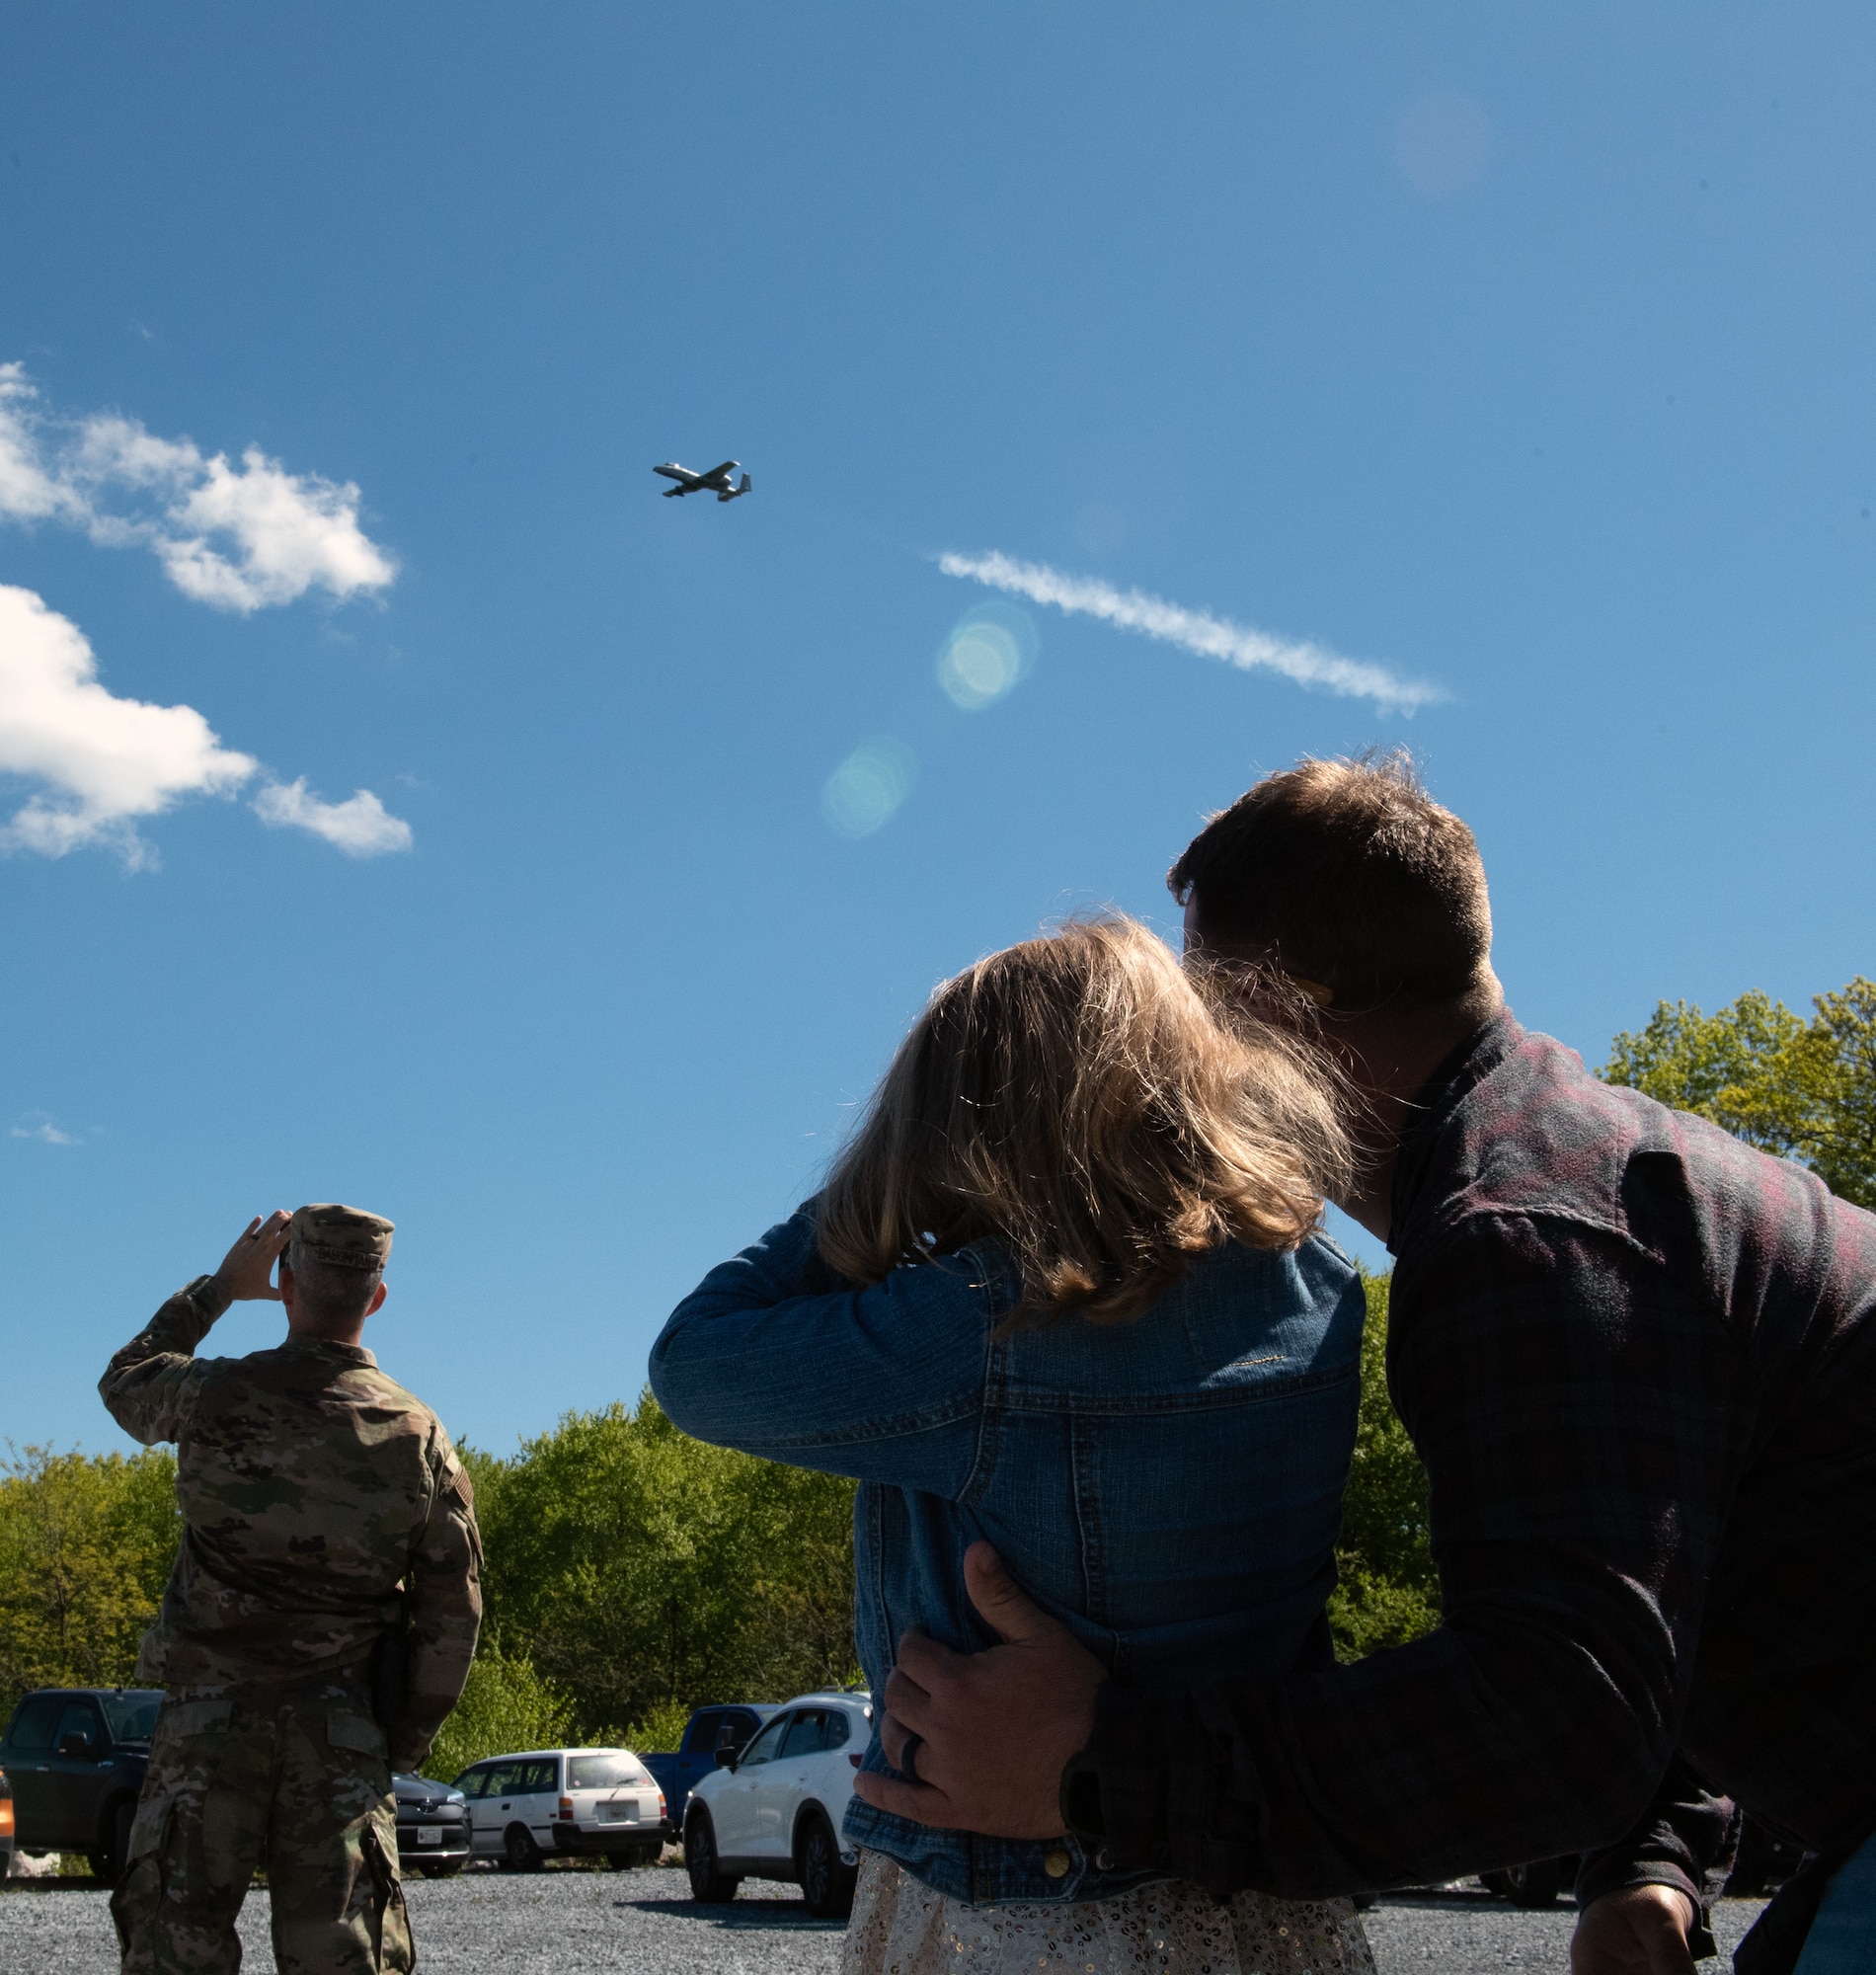 Families of 175th Wing Airmen observe A-10C Thunderbolt II aircraft assigned to the 104th Fighter Squadron conduct training exercises May 6, 2023, at Fort Indiantown Gap, Pennsylvania.